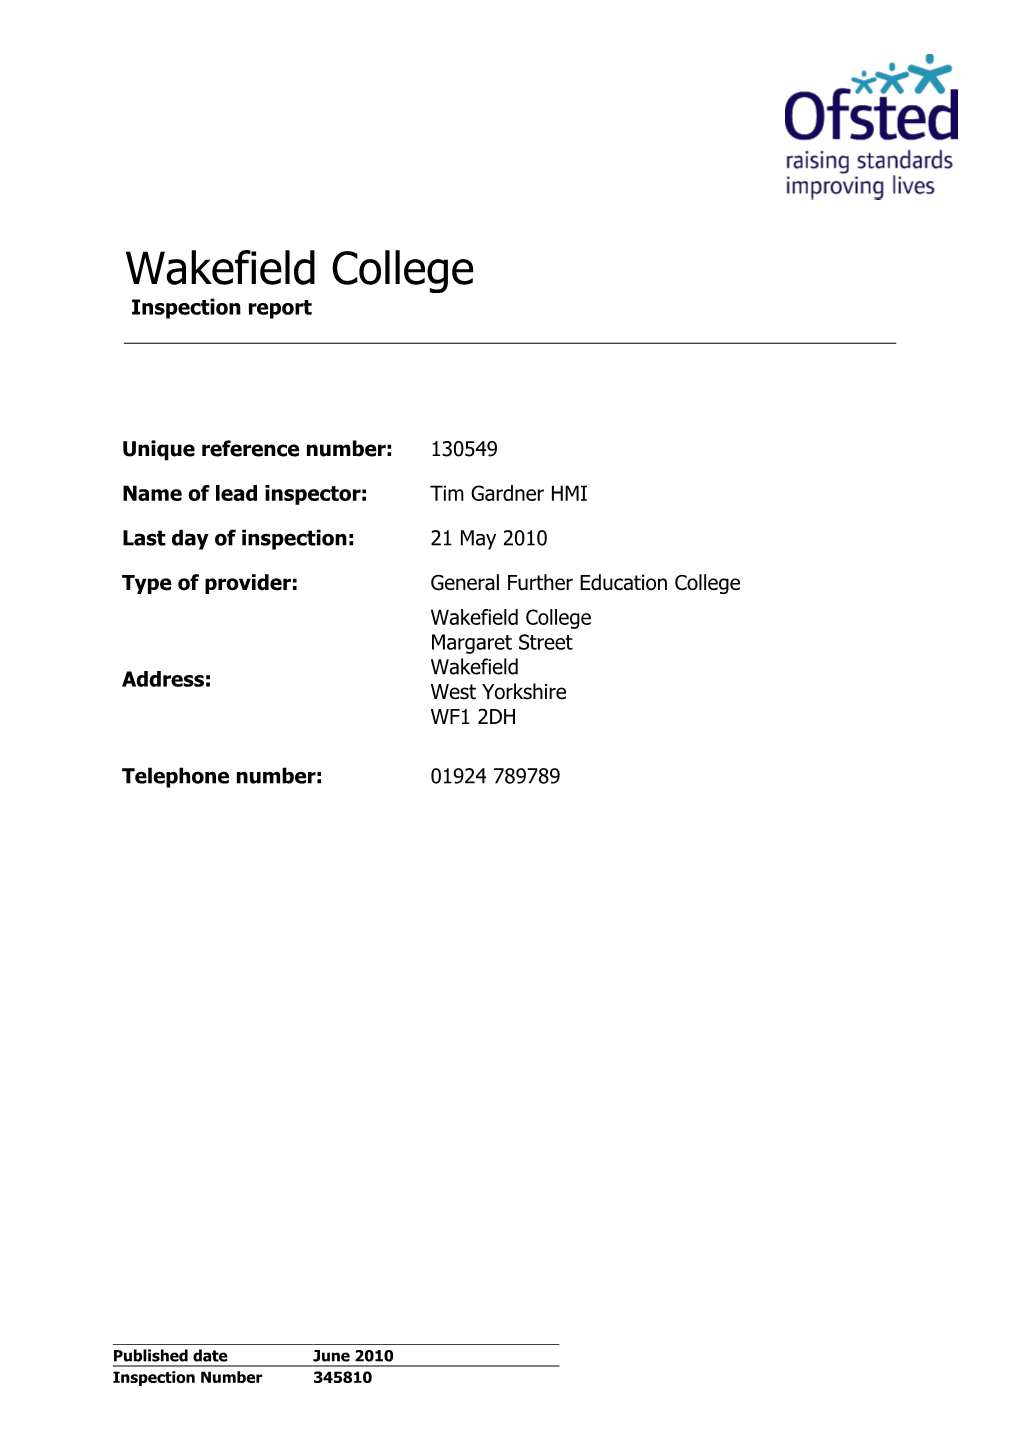 Wakefield College Inspection Report